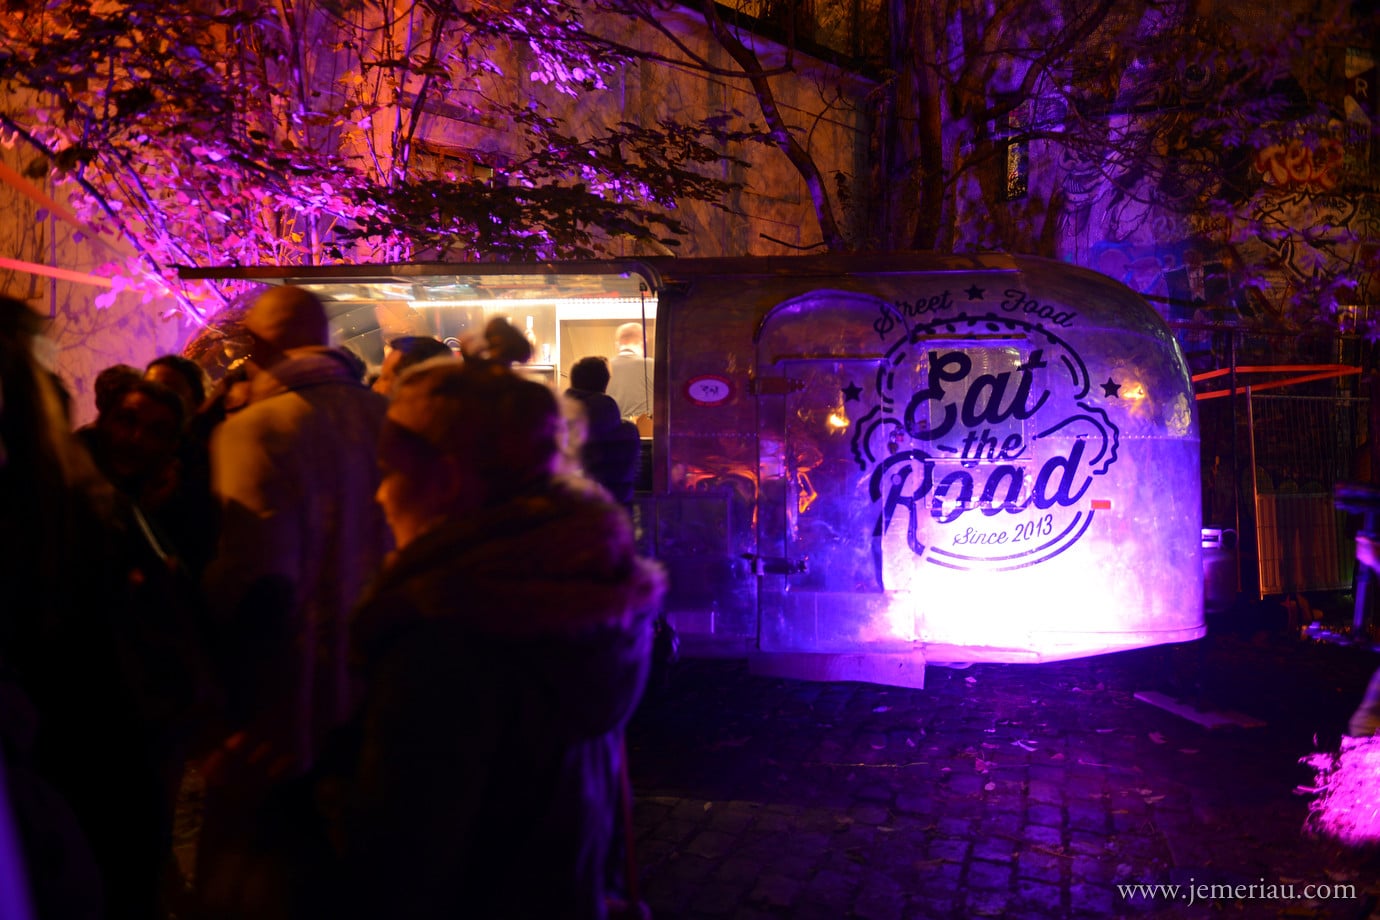 eat the road food truck traiteur food drinks loft paolo calia les frigos agence wato we are the oracle evenementiel events